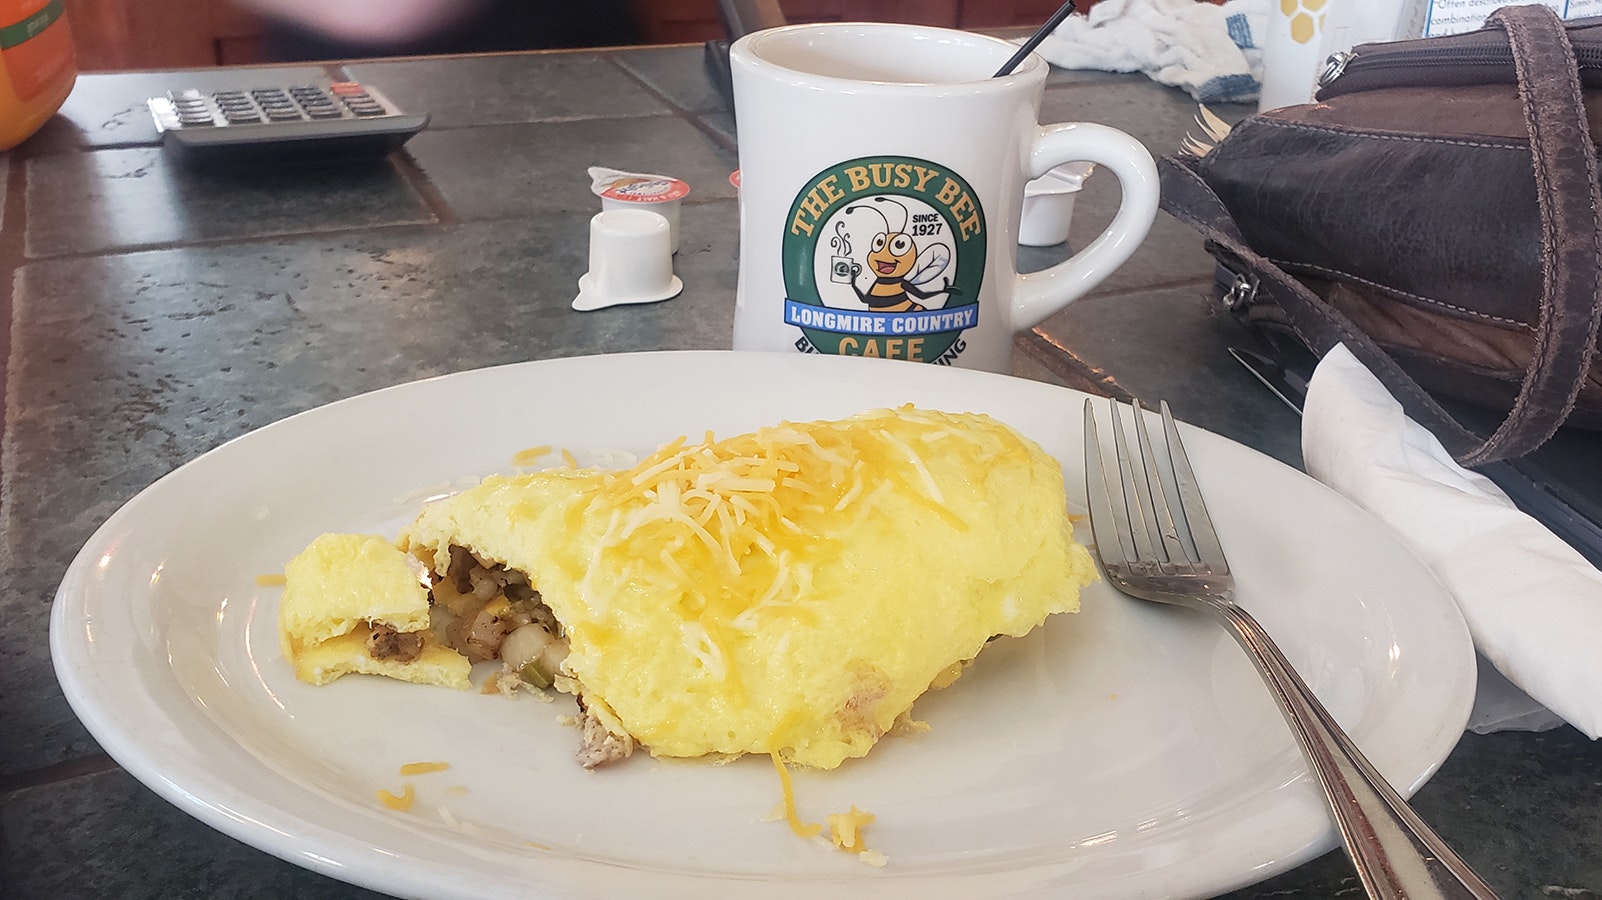 The Busy Bee Café is part of Occidental Row and offers a great quick breakfast with coffee.